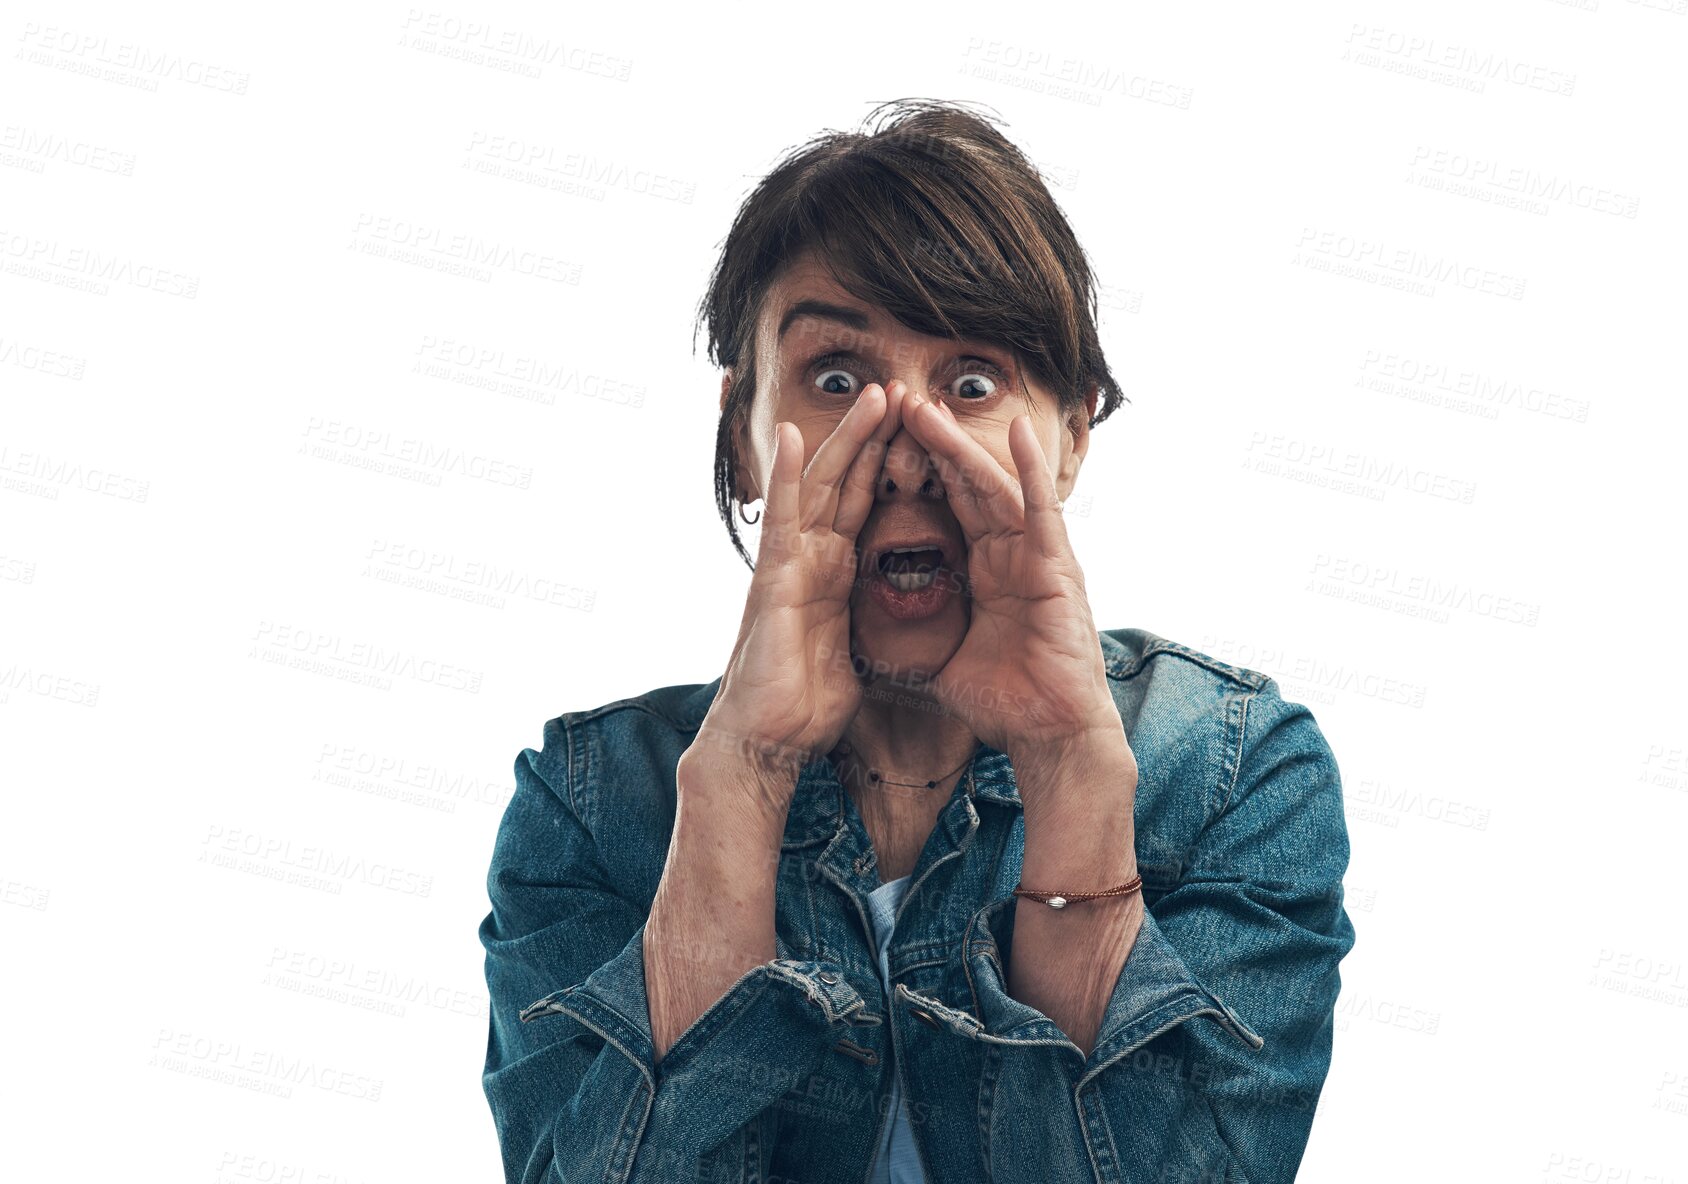 Buy stock photo Shouting, communication and the portrait of a woman with an announcement, voice and surprise news. Amazed, loud and a mature person screaming a secret isolated on a transparent png background